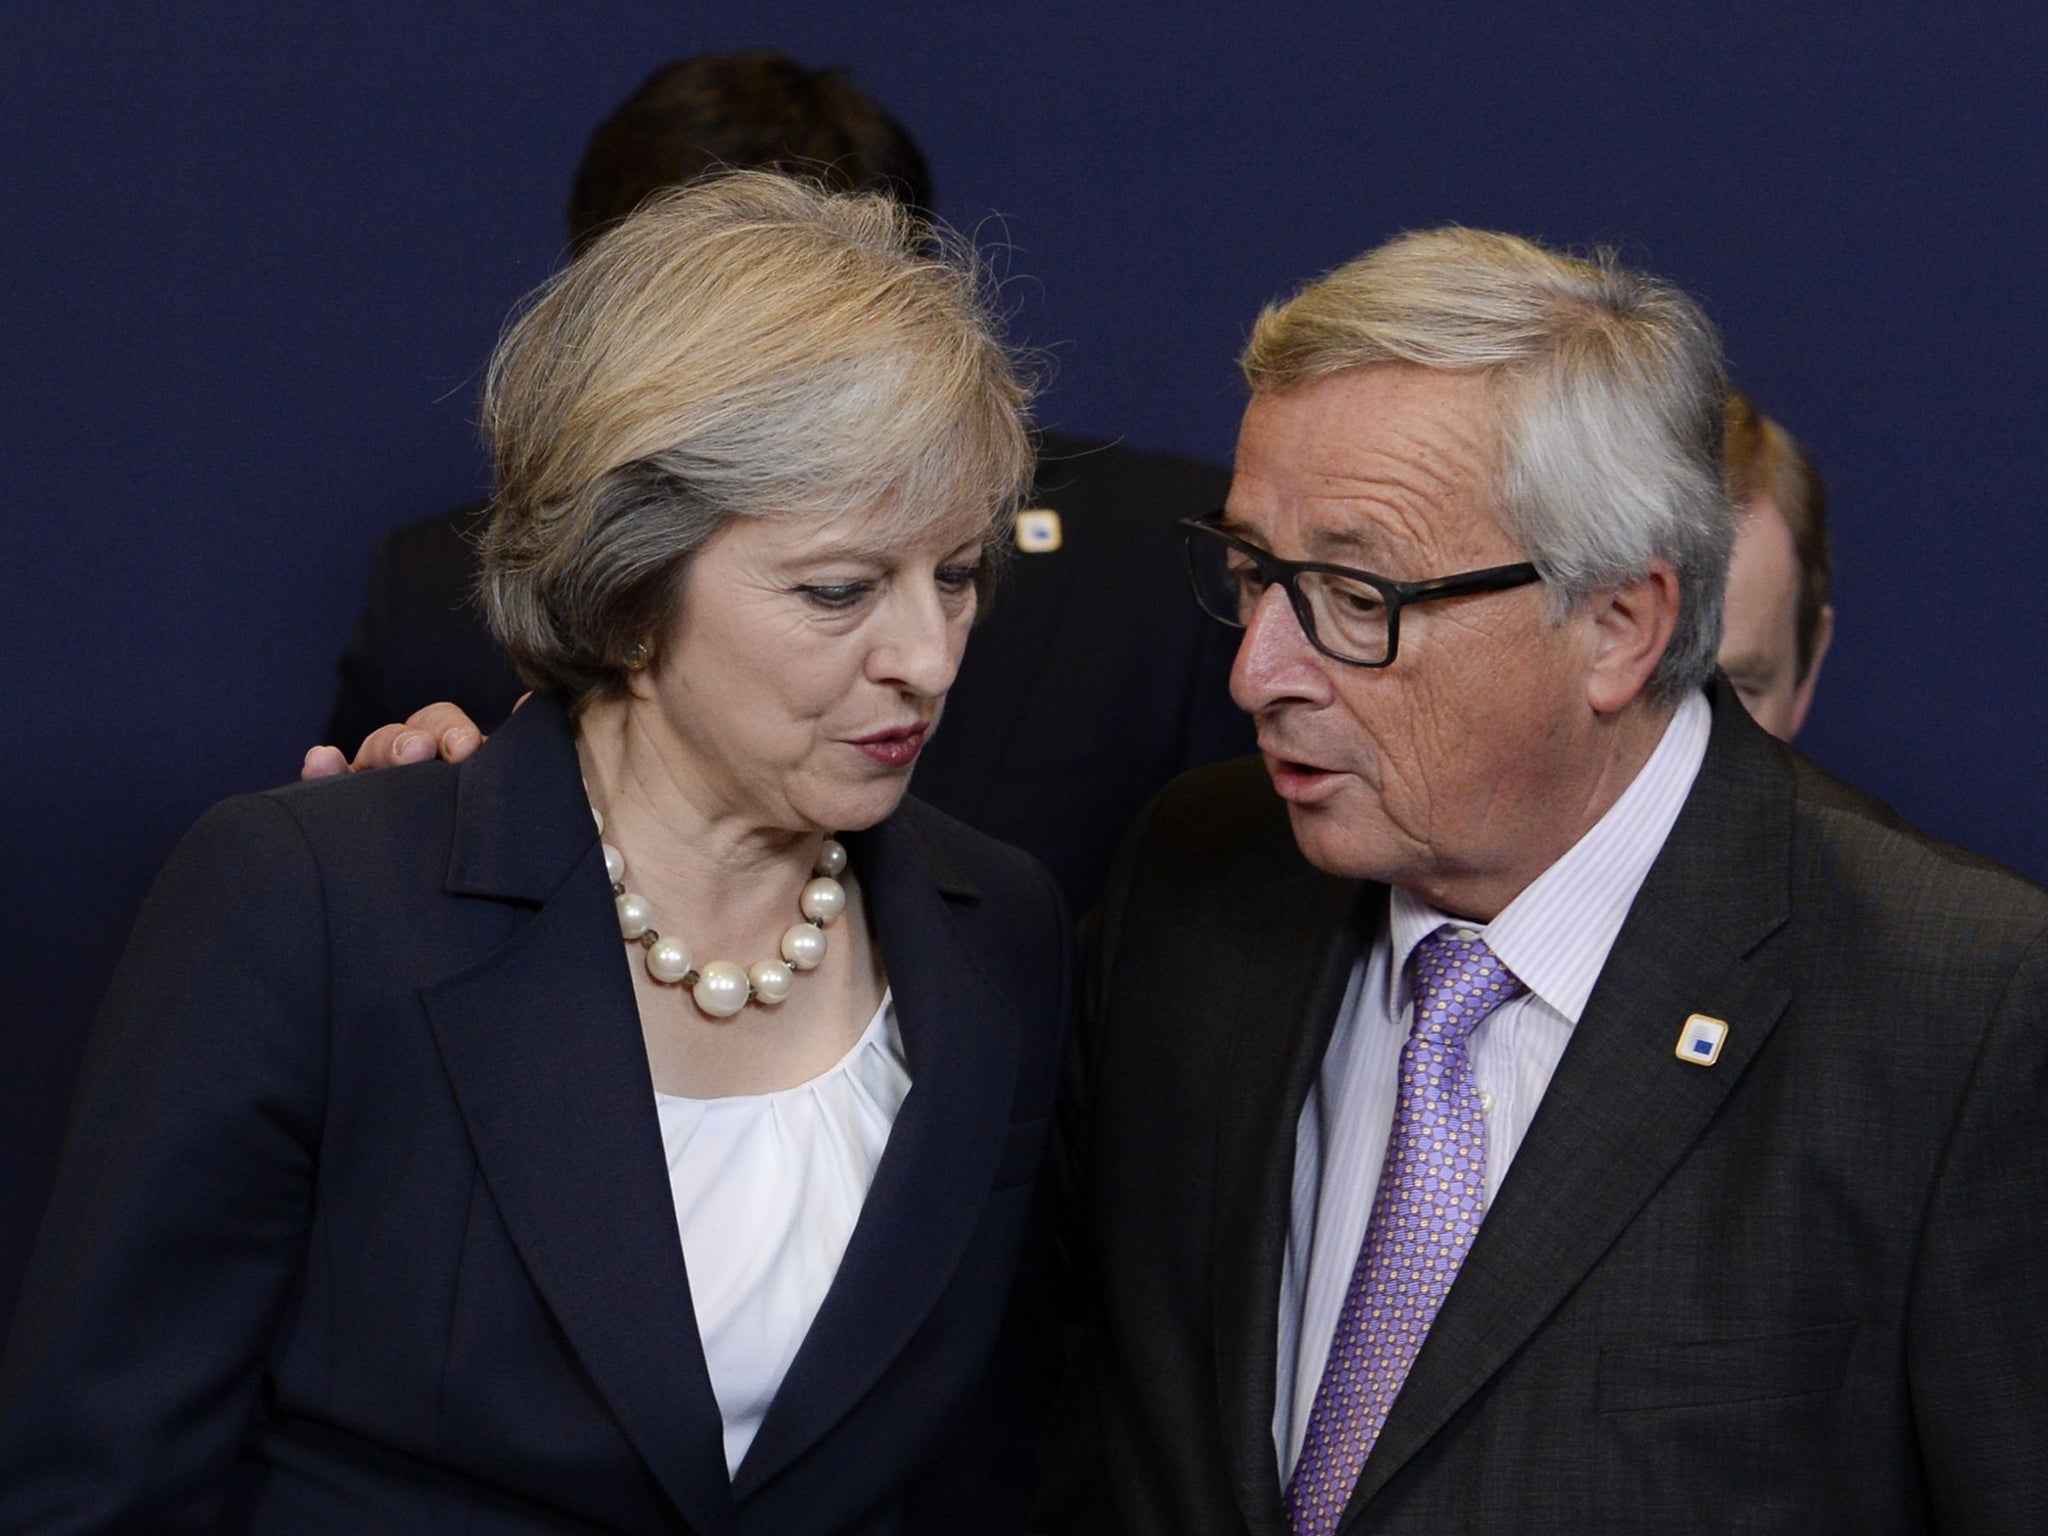 The PM with Jean-Claude Juncker at the European Council summit meeting in Brussels